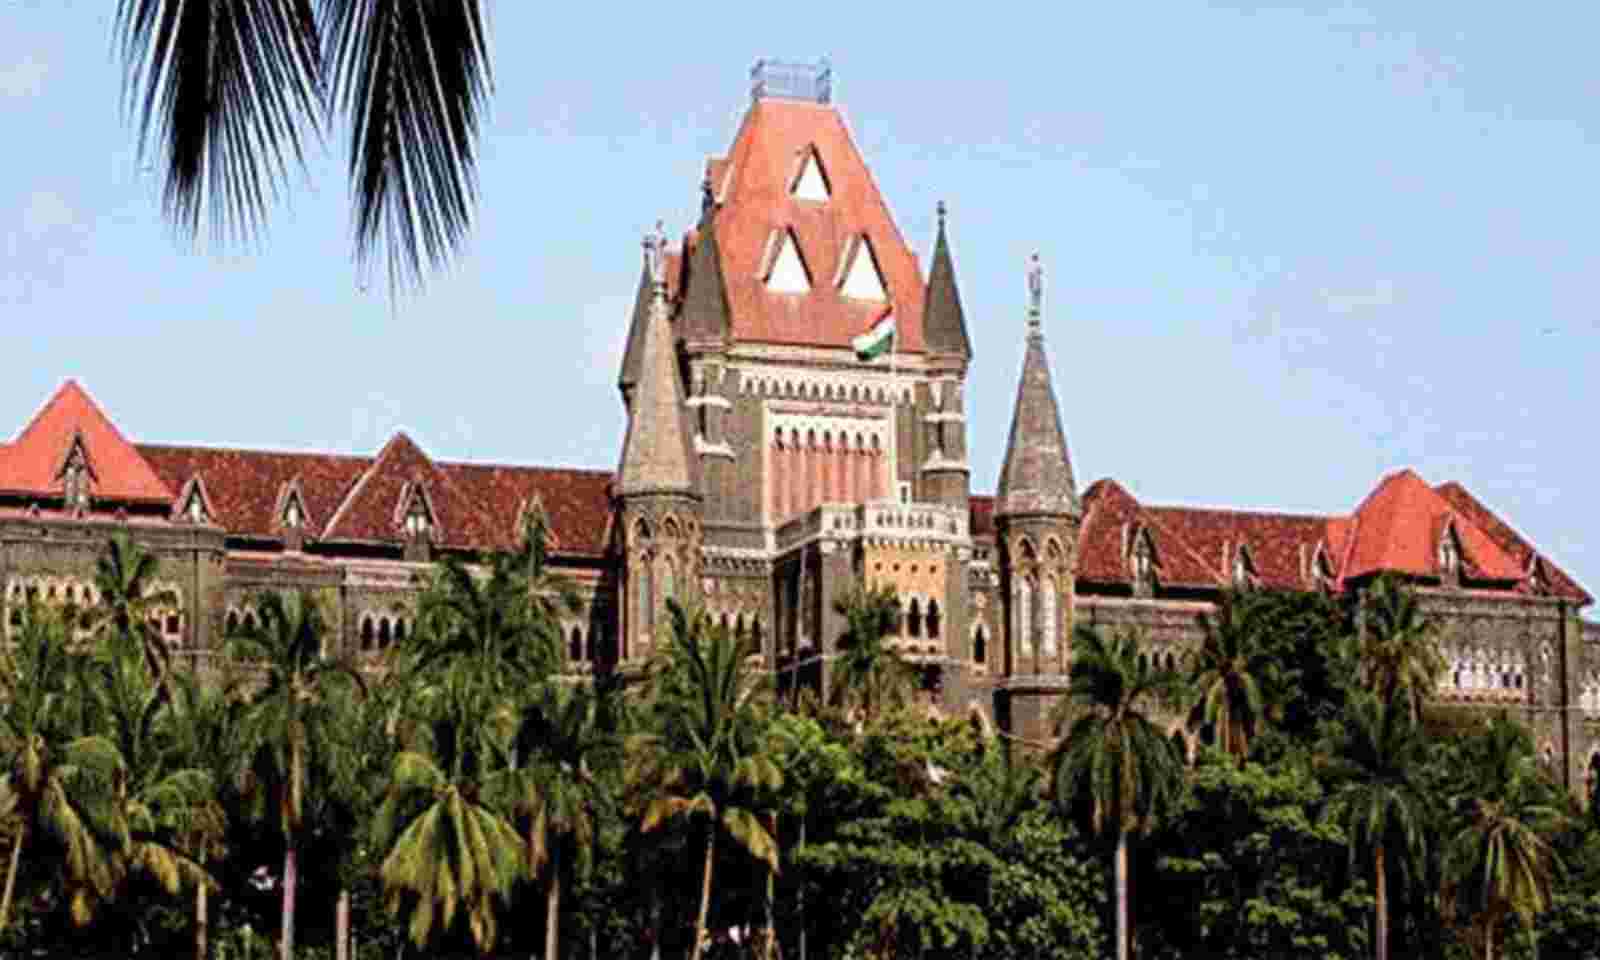 Tax Invoices Containing Reference To Arbitration, Does Not Constitute An Arbitration Agreement: Bombay High Court